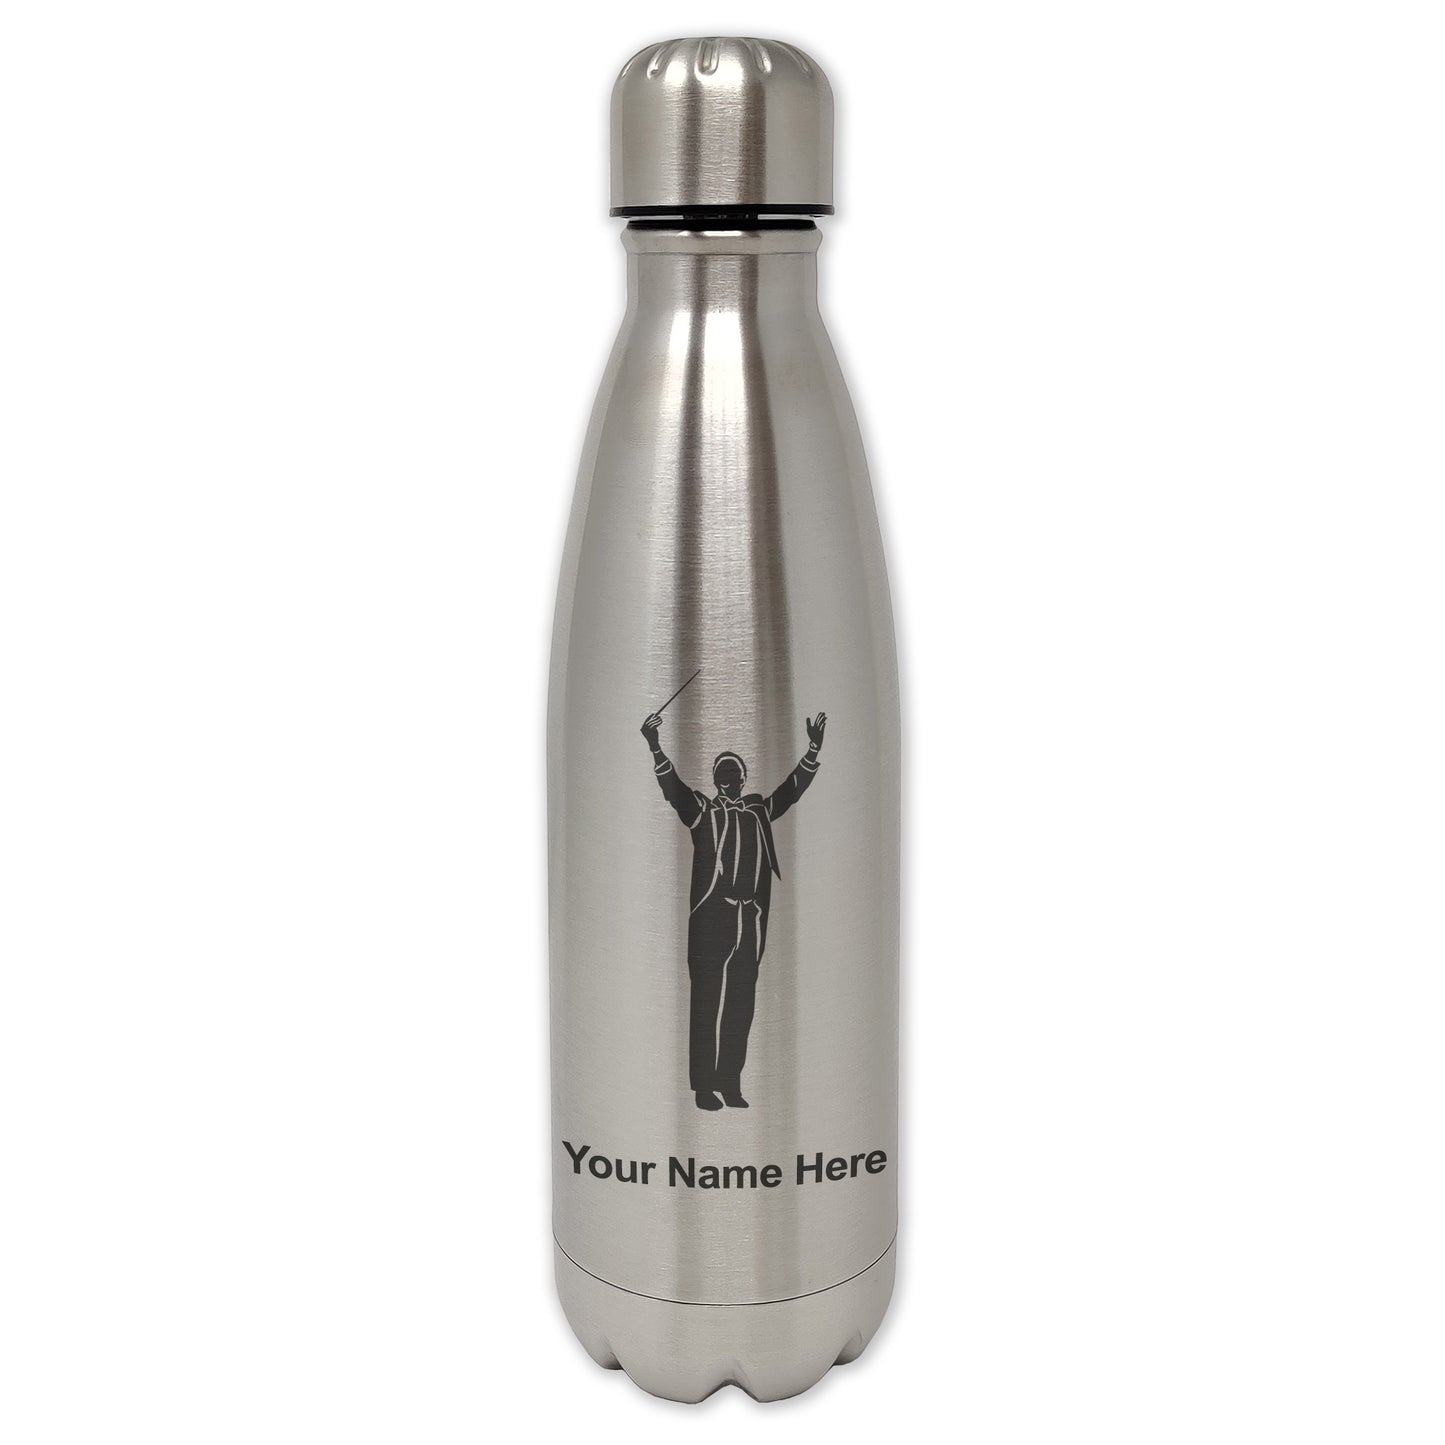 LaserGram Single Wall Water Bottle, Band Director, Personalized Engraving Included